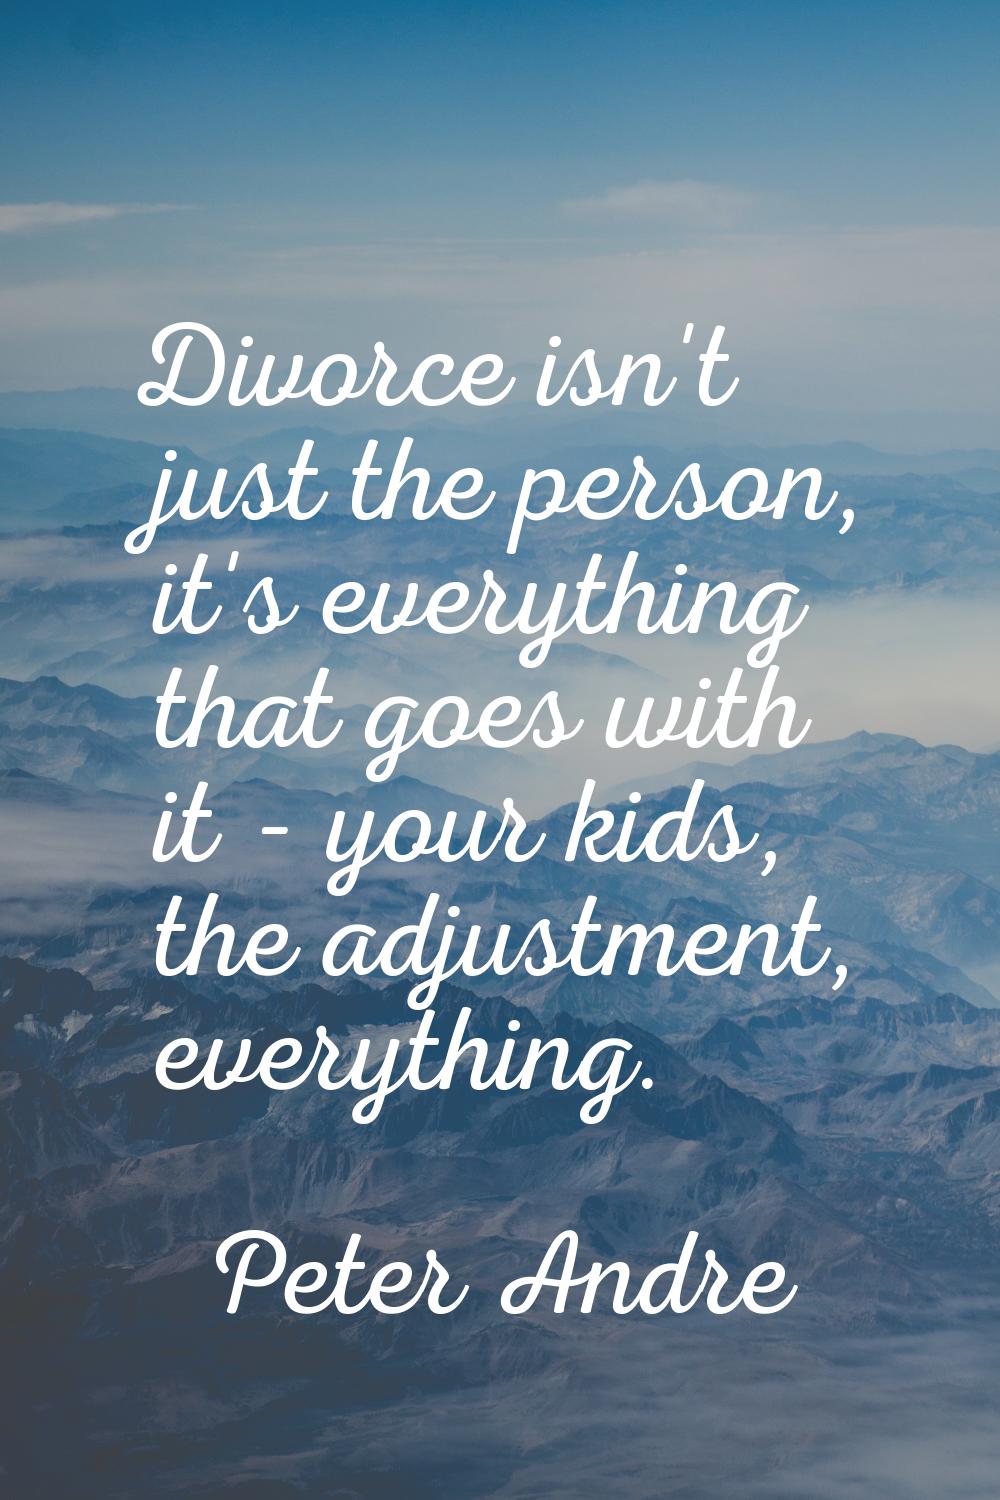 Divorce isn't just the person, it's everything that goes with it - your kids, the adjustment, every